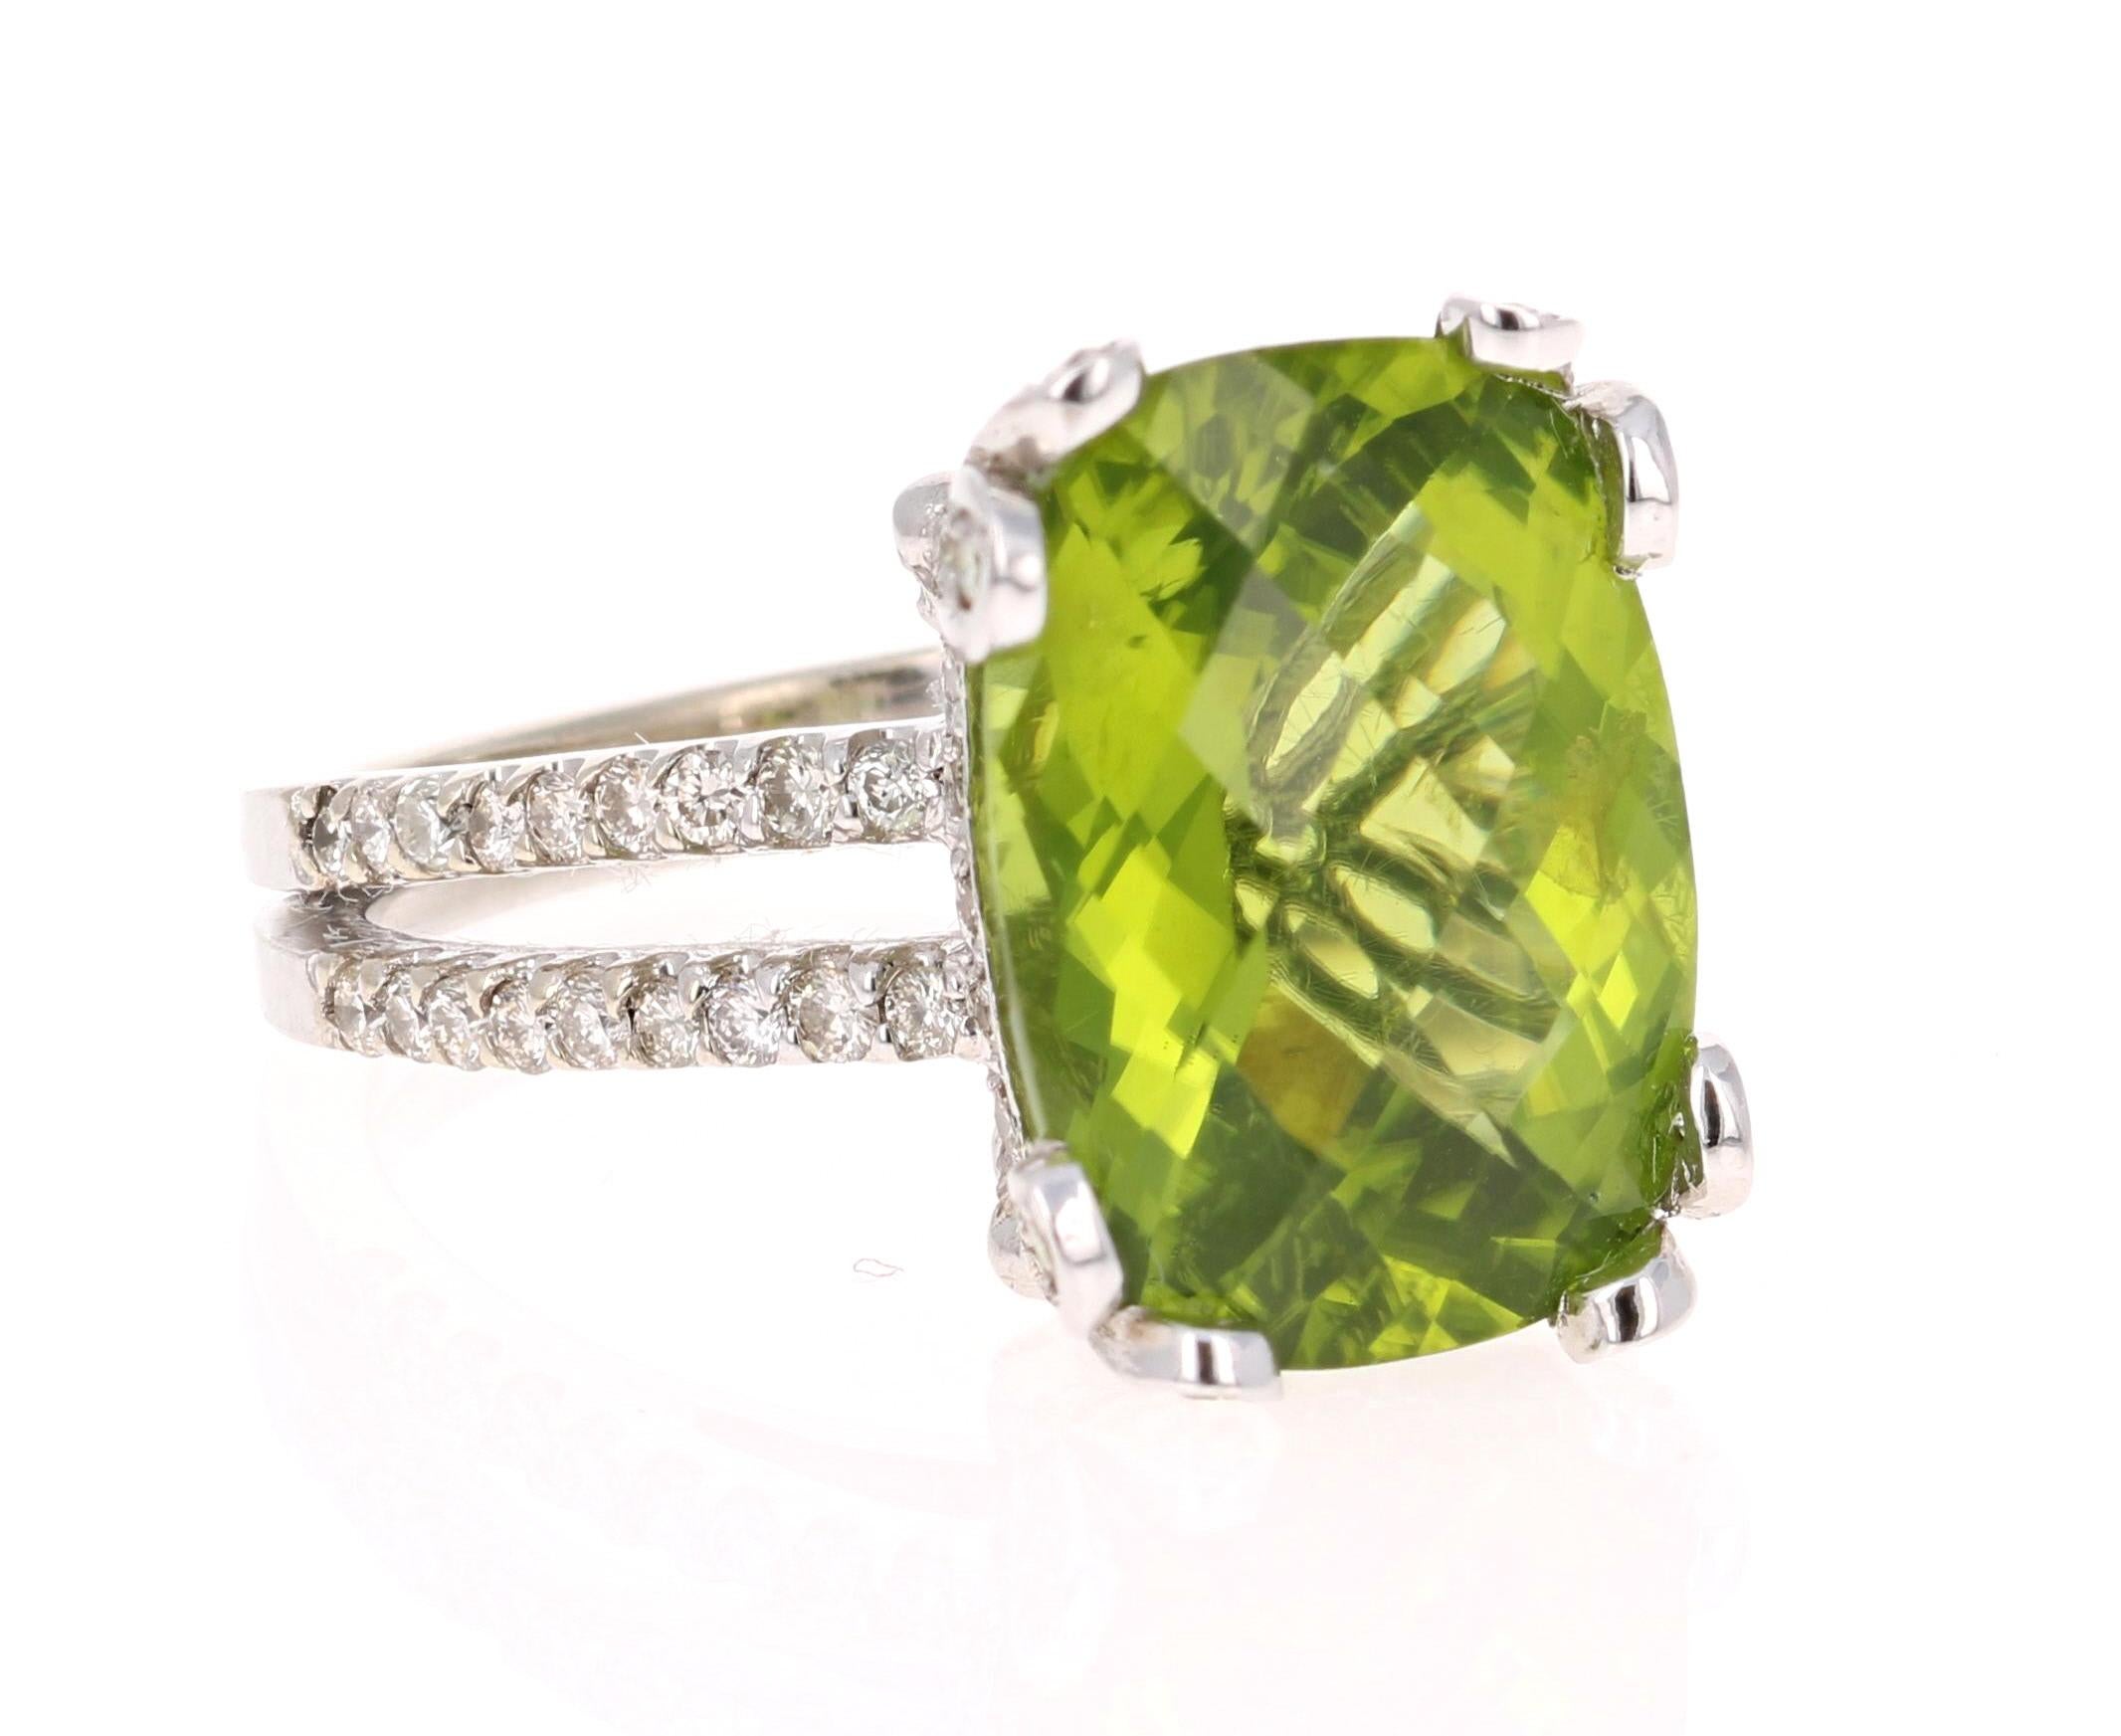 Bright, Beautiful and Bling! 

This Peridot and Diamond Ring has a 7.84 Carat Cushion Oval Cut Peridot and has 88 Round Cut Diamonds that weigh 0.82 Carats on the shank and prongs of the ring. The total carat weight of the ring is 8.66 Carats. 

It